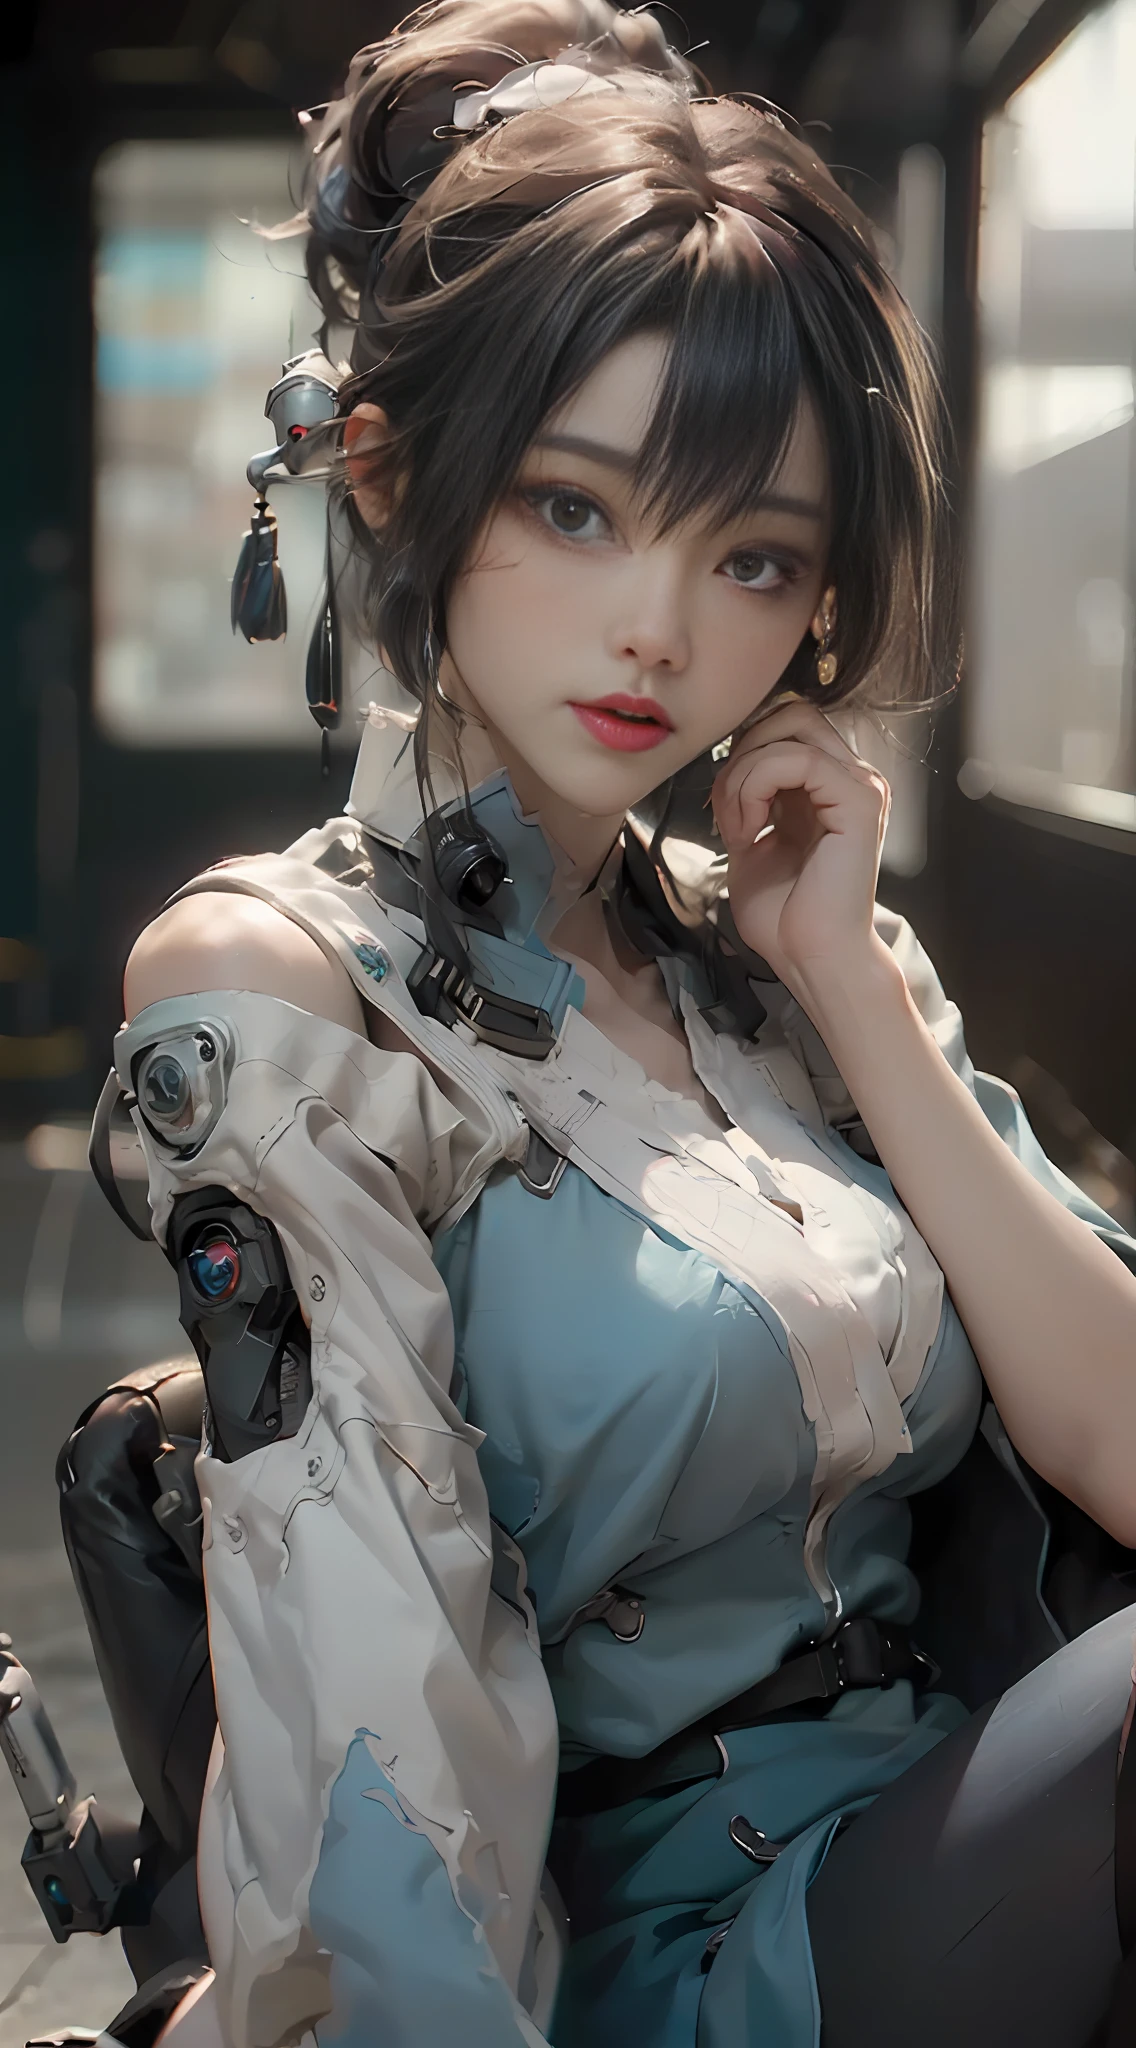 (Best Quality), ((Masterpiece), (Detail: 1.4), 3D, A Beautiful Cyberpunk Woman, HDR (High Dynamic Range), Ray Tracing, NVIDIA RTX, Super-Resolution, Unreal 5, Subsurface Scattering, PBR Textures, Post-Processing, Anisotropic Filtering, Depth of Field, Maximum Sharpness and Clarity, Multi-layer Textures, Albedo and Highlight Maps, Surface Shading, Precise simulation of light-material interactions, perfect proportions, delicacy, facing the lens, moles in the corners of the eyes, orgasmic expressions, perfect figure, Octane Render, bicolor light, large aperture, low ISO, white balance, rule of thirds, 8K RAW,